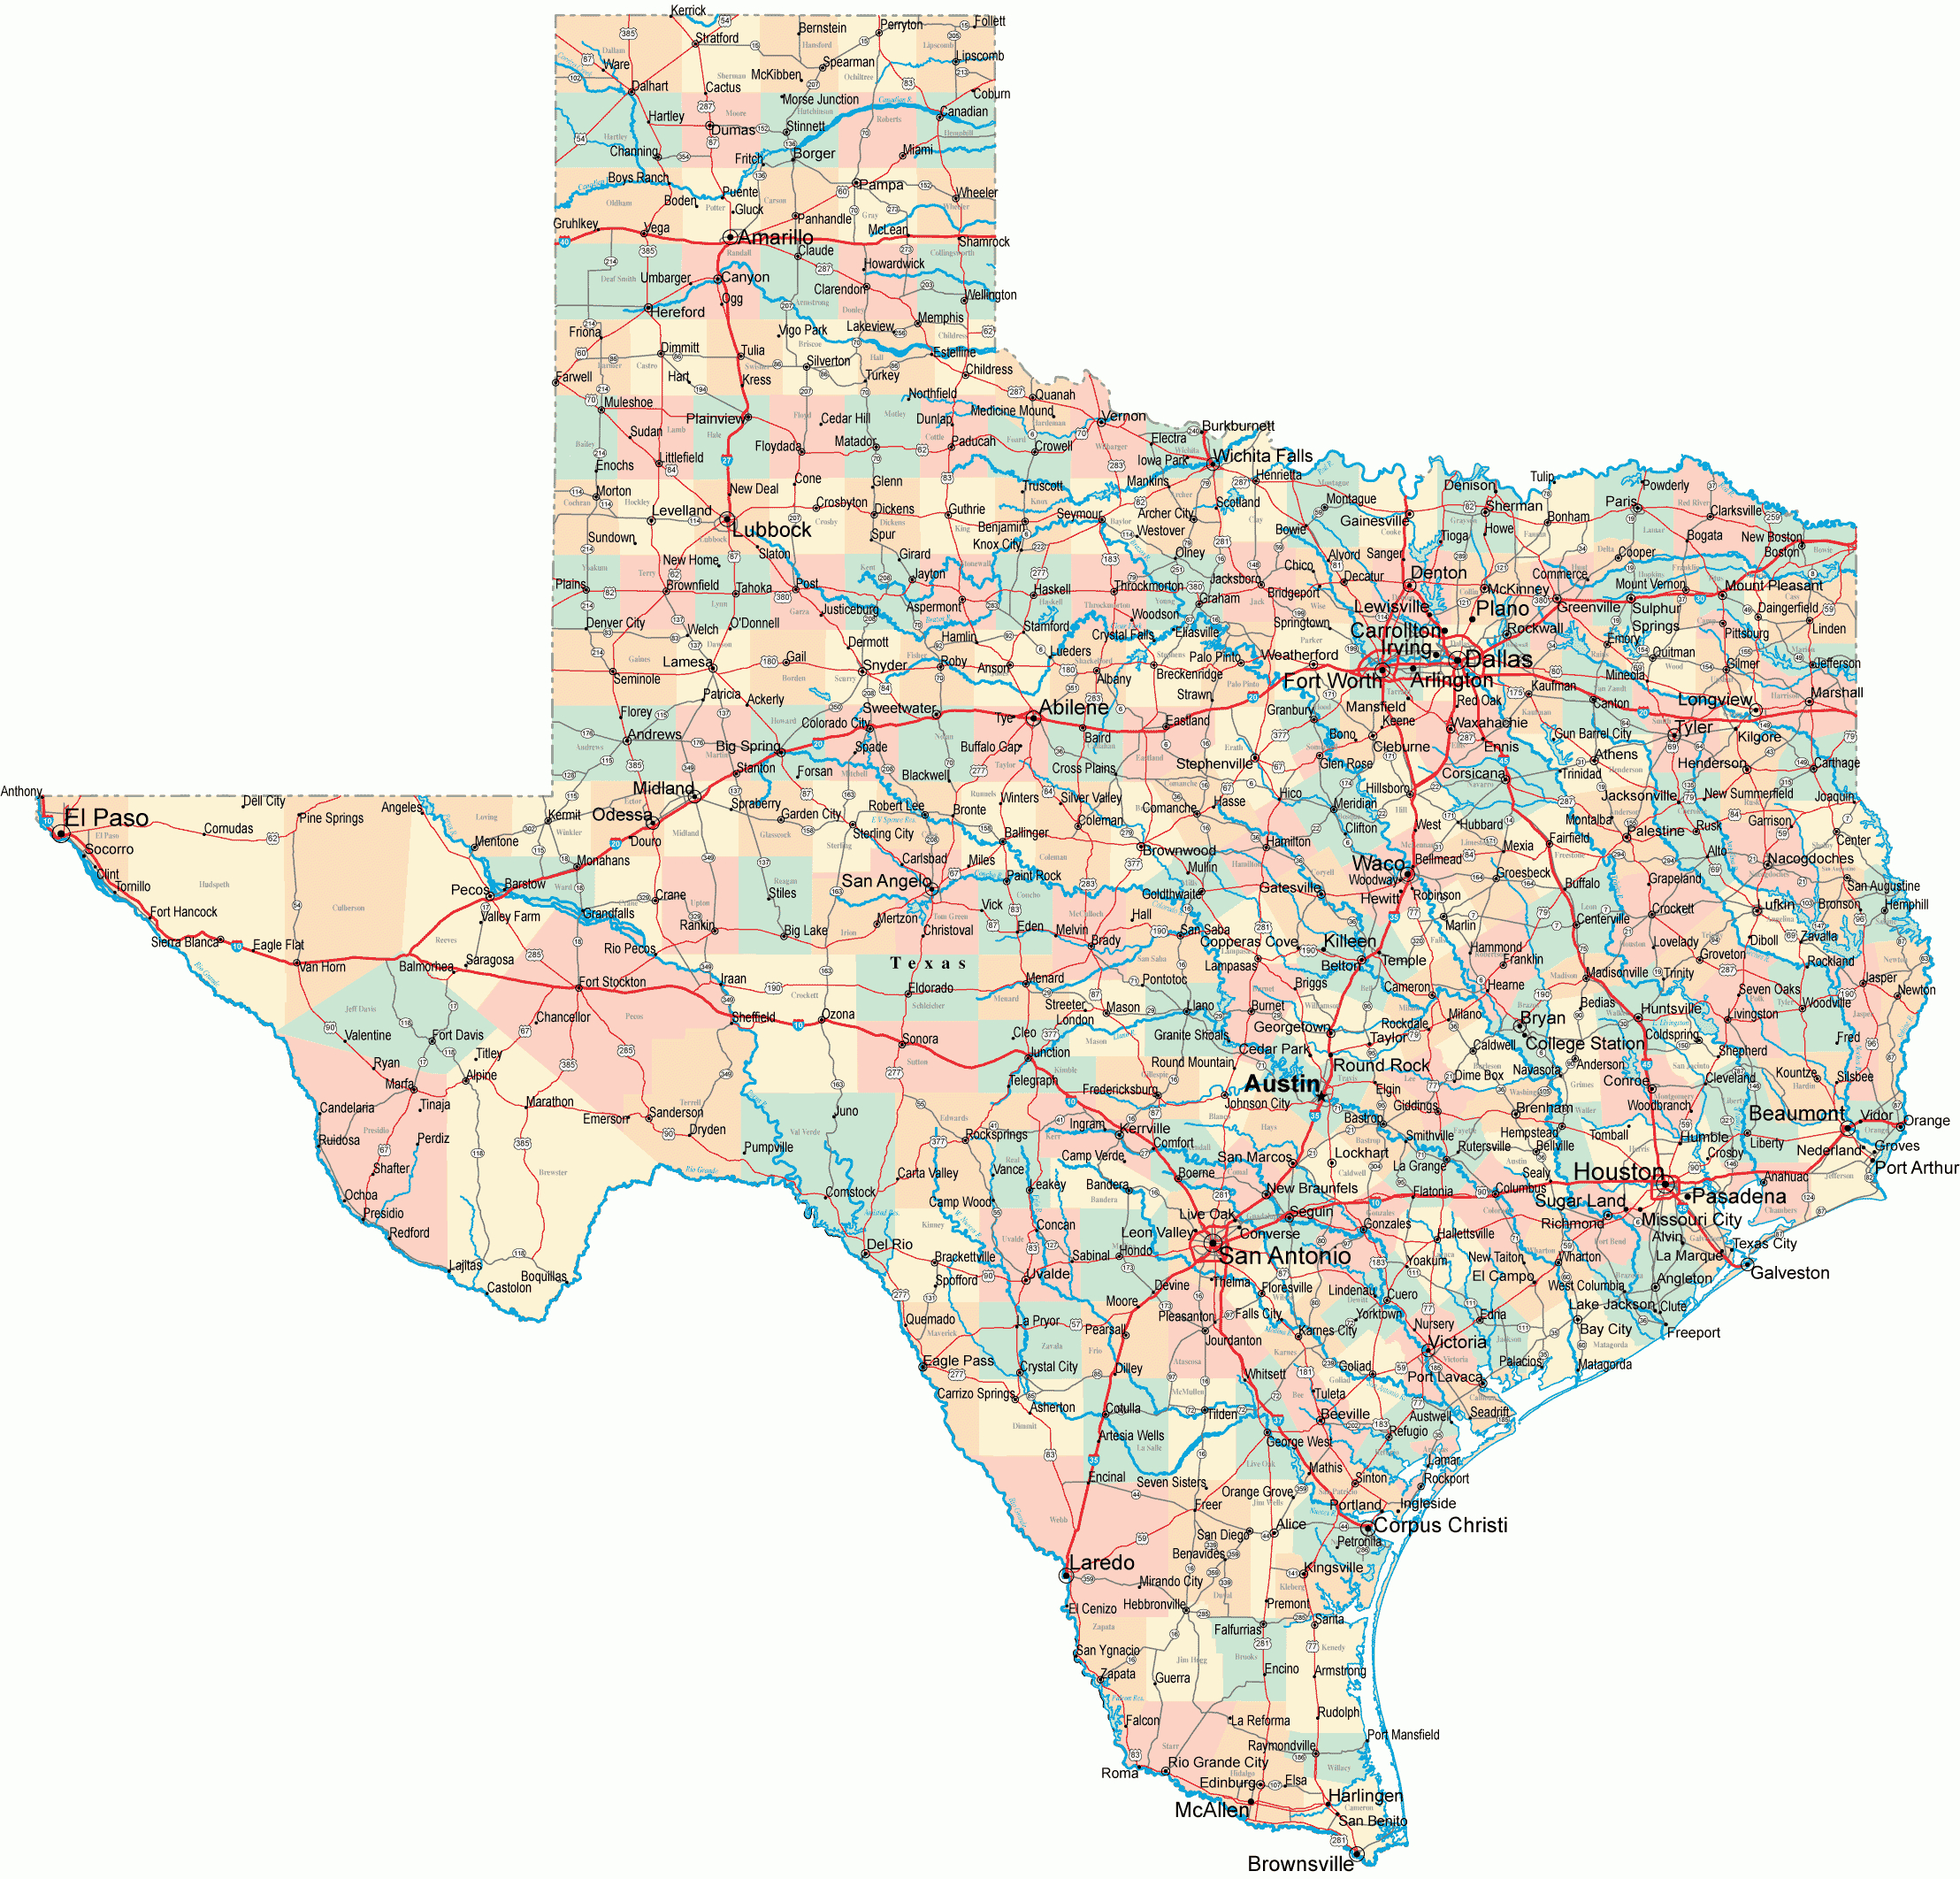 Texas Road Map - Tx Road Map - Texas Highway Map - Detailed Road Map Of Texas